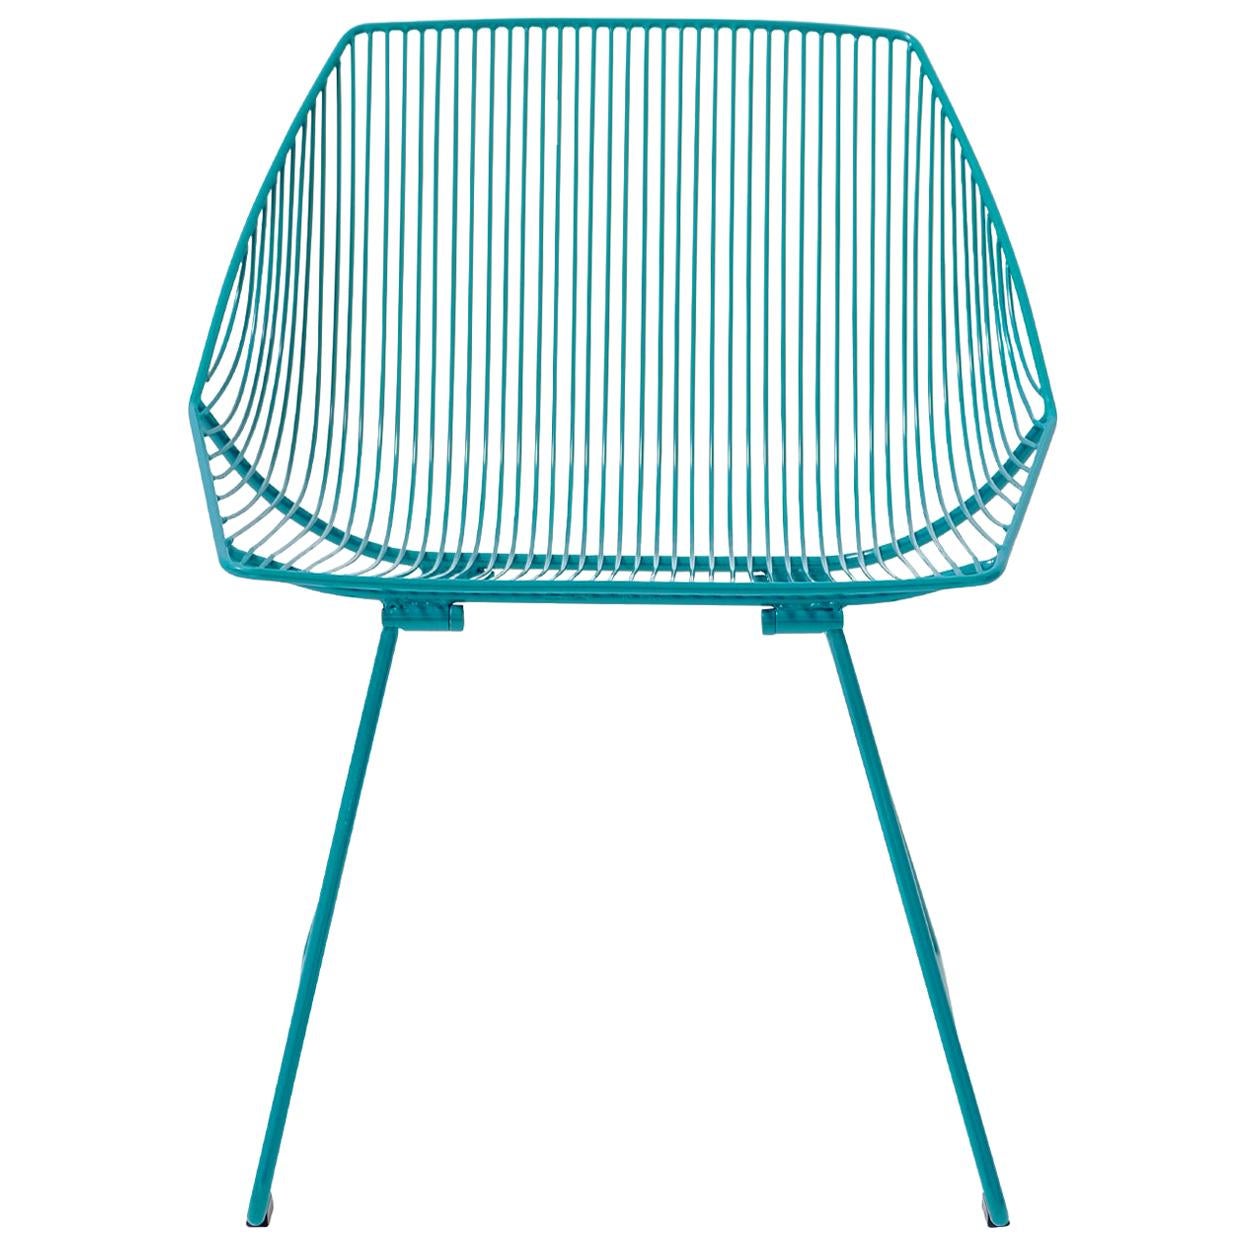 Minimalist Outdoor Wire Lounge Chair, The Bunny Lounge in Peacock Blue